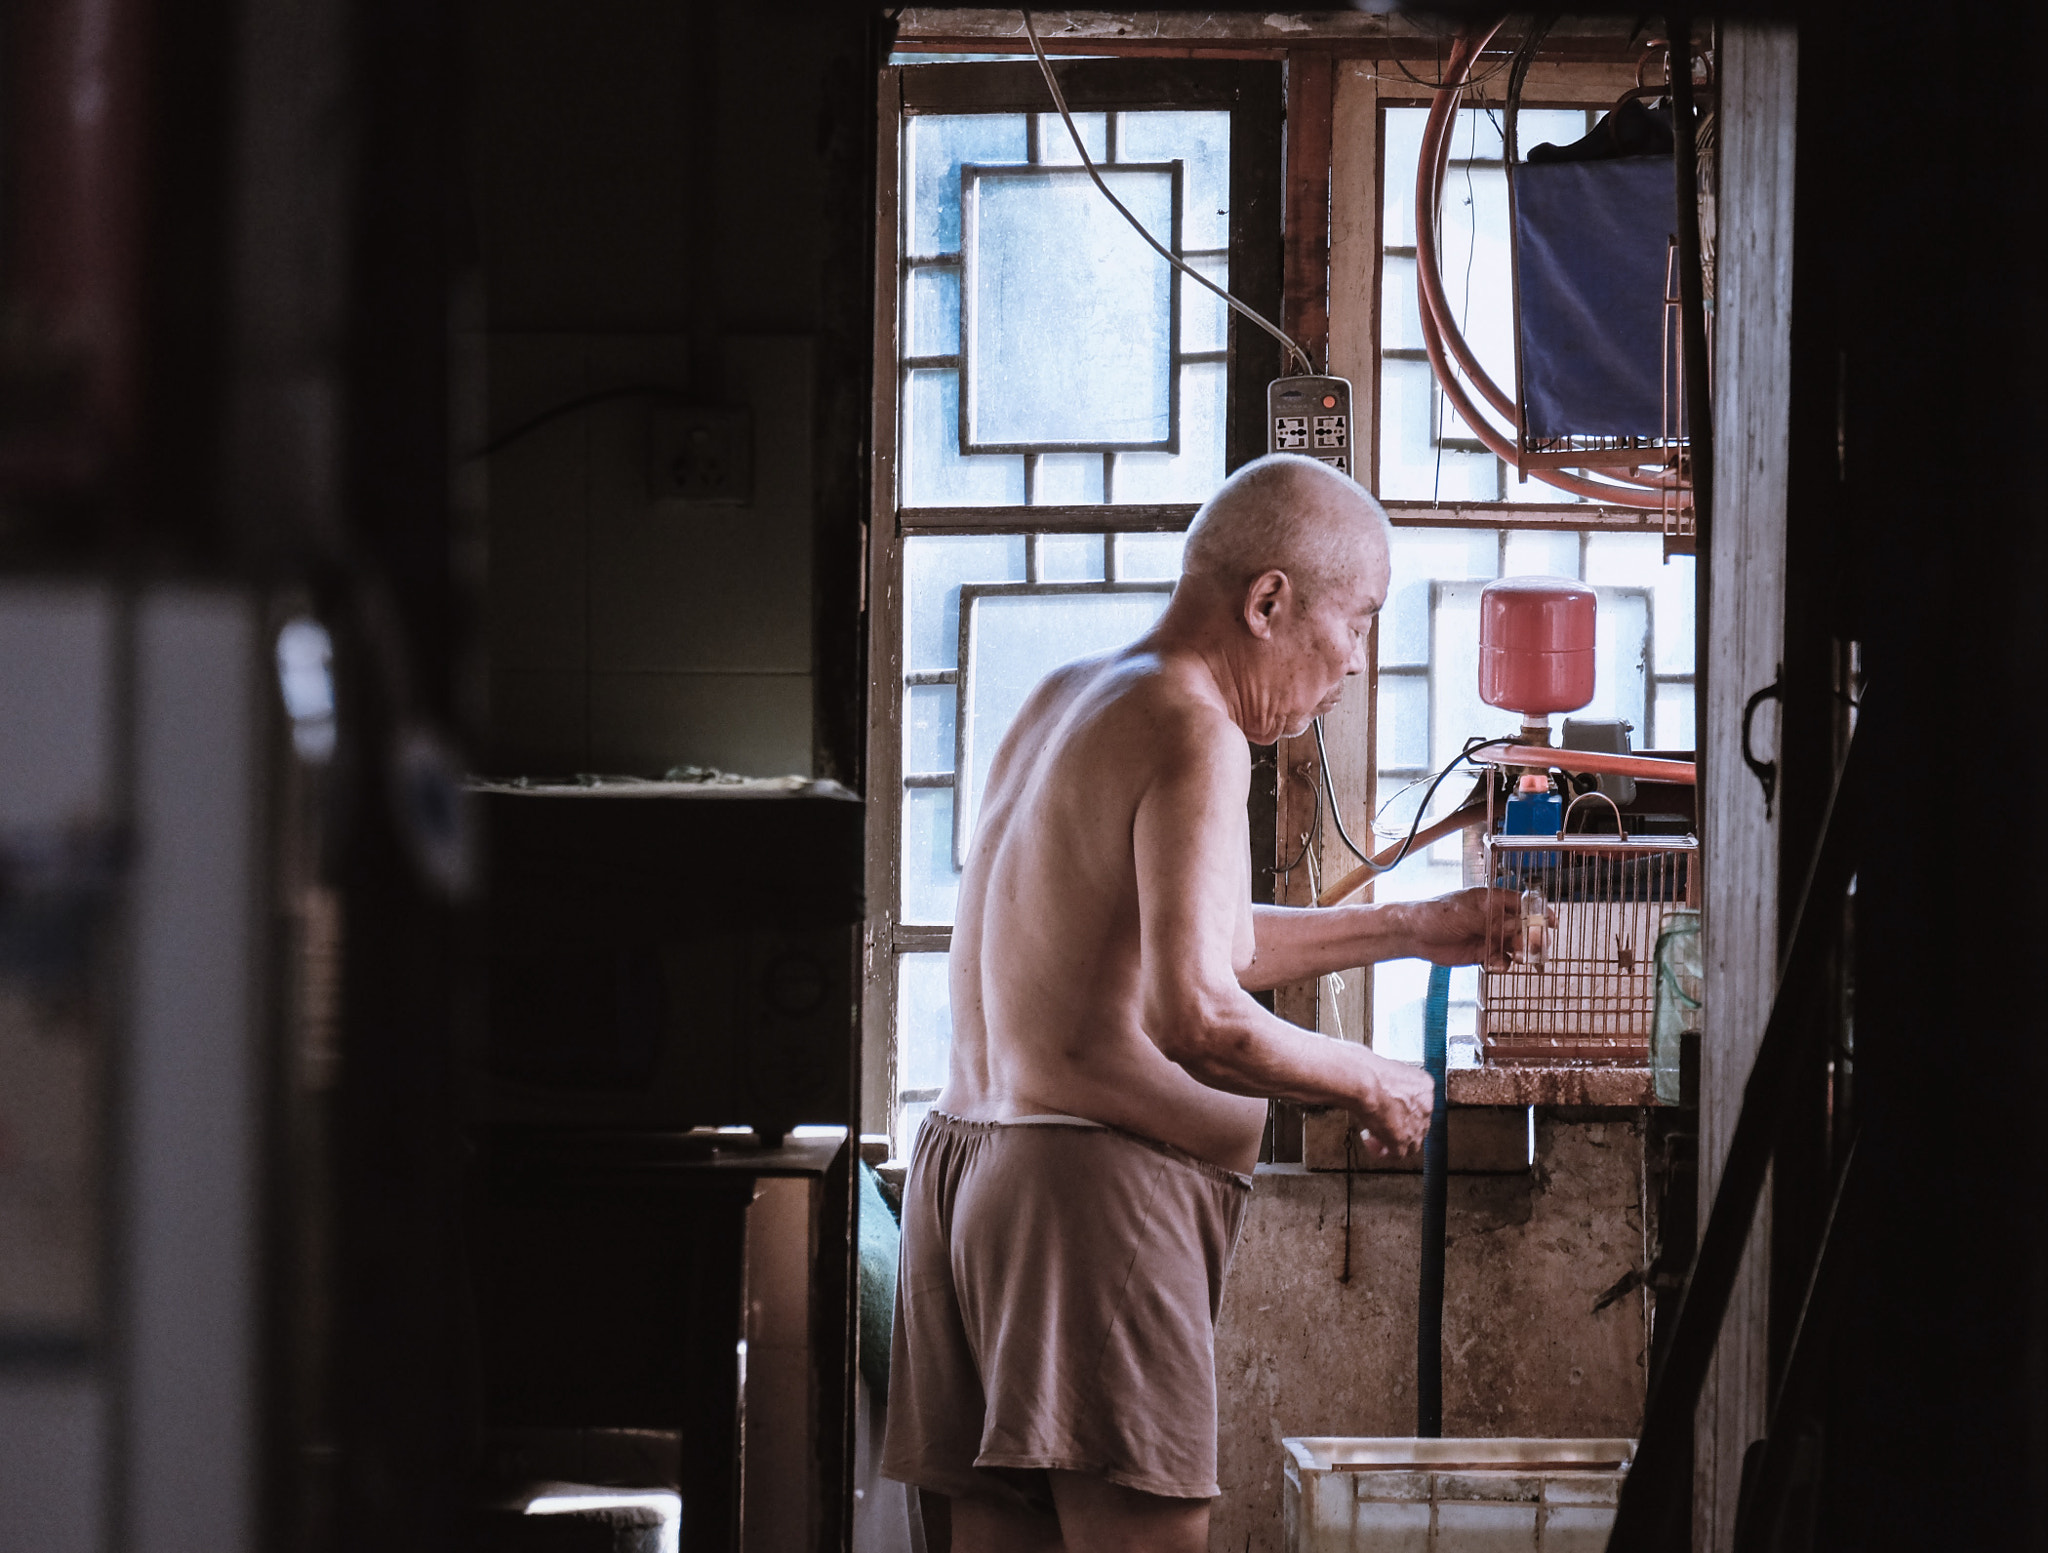 Fujifilm X-T10 + Fujifilm XC 50-230mm F4.5-6.7 OIS II sample photo. A retired old man cleaning bird cage. picture taken in suzhou, china photography